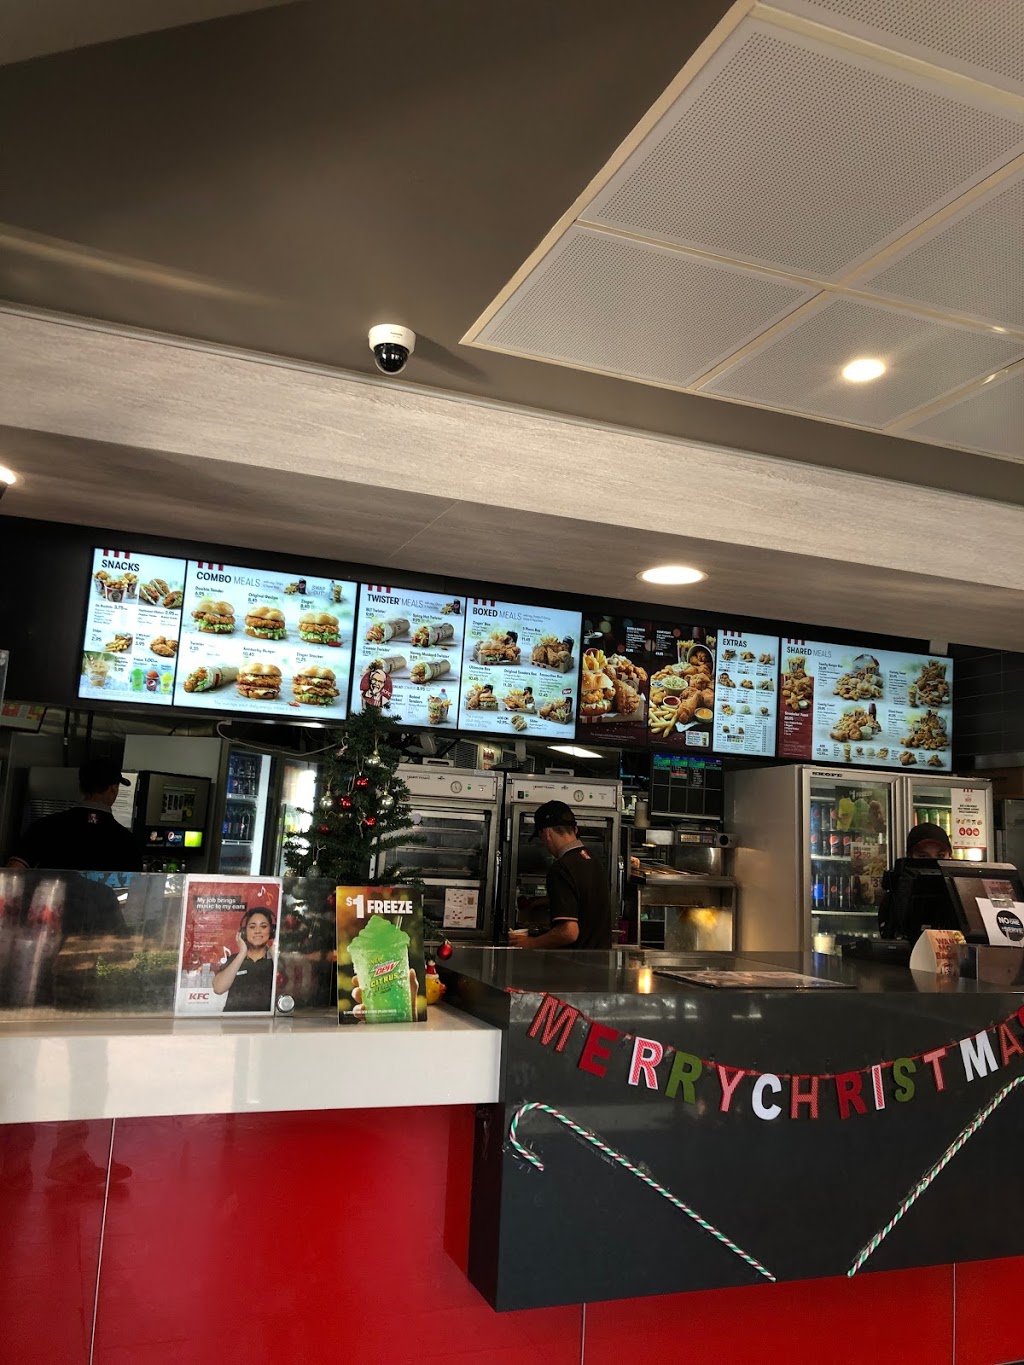 KFC The Entrance | meal takeaway | 16 The Entrance Road Corner, Ocean Parade, The Entrance NSW 2261, Australia | 0243322998 OR +61 2 4332 2998